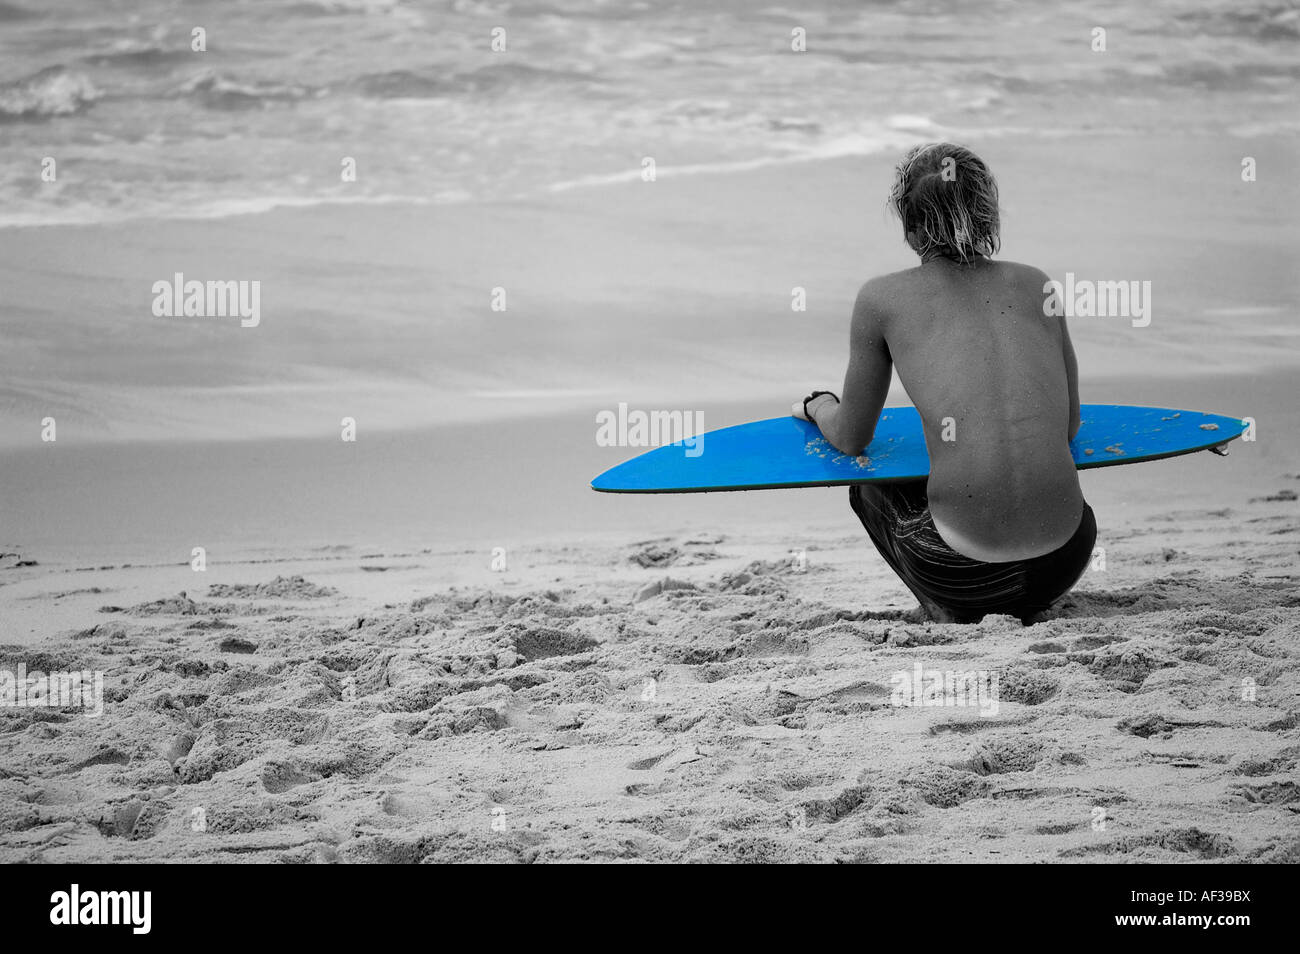 Surfing in San Diego sourthern California USA Stock Photo